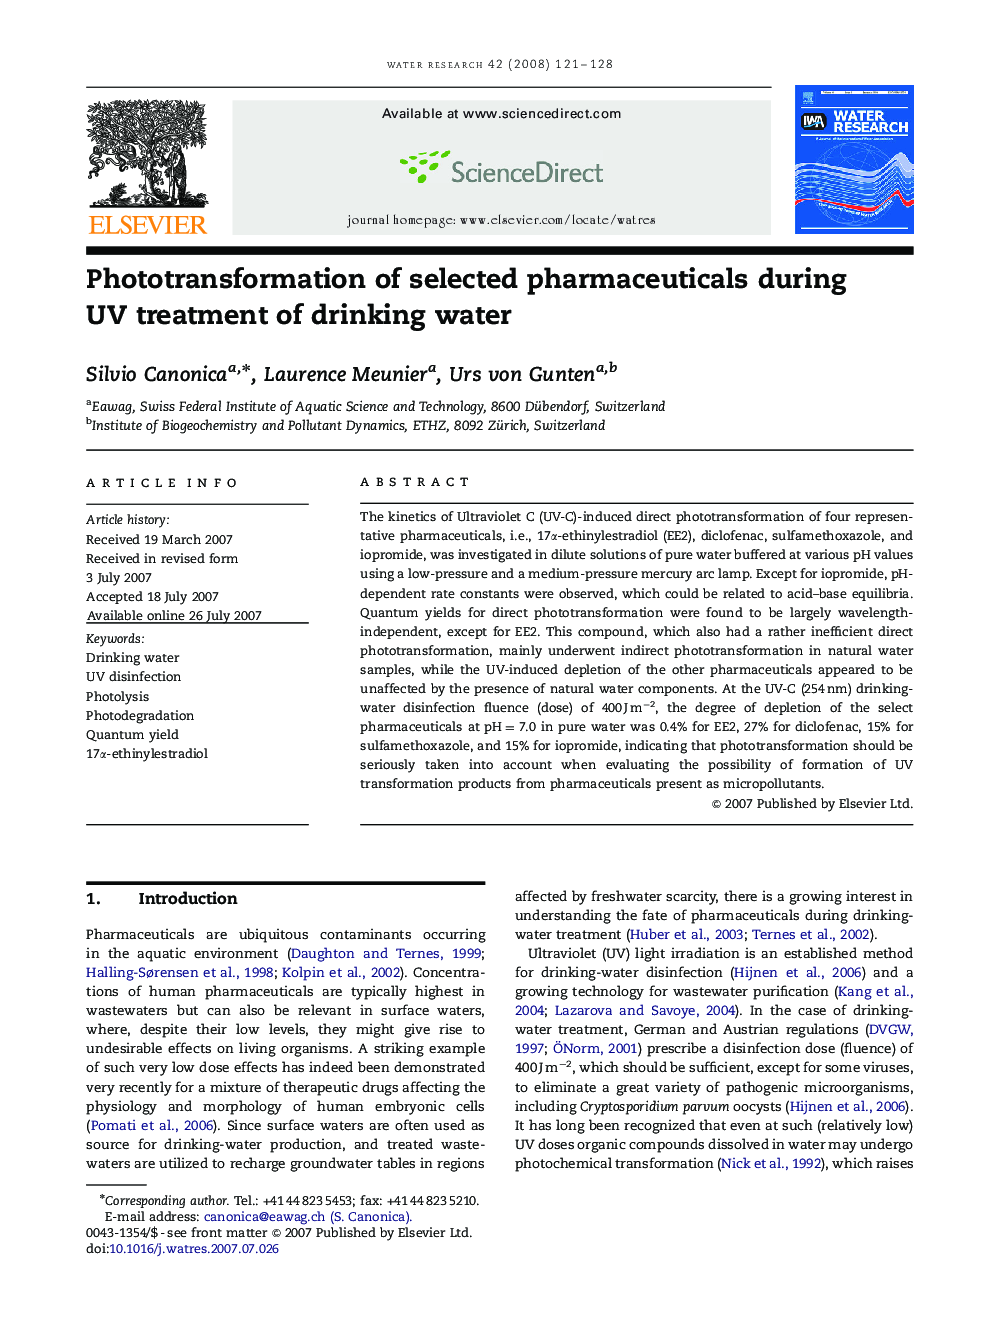 Phototransformation of selected pharmaceuticals during UV treatment of drinking water